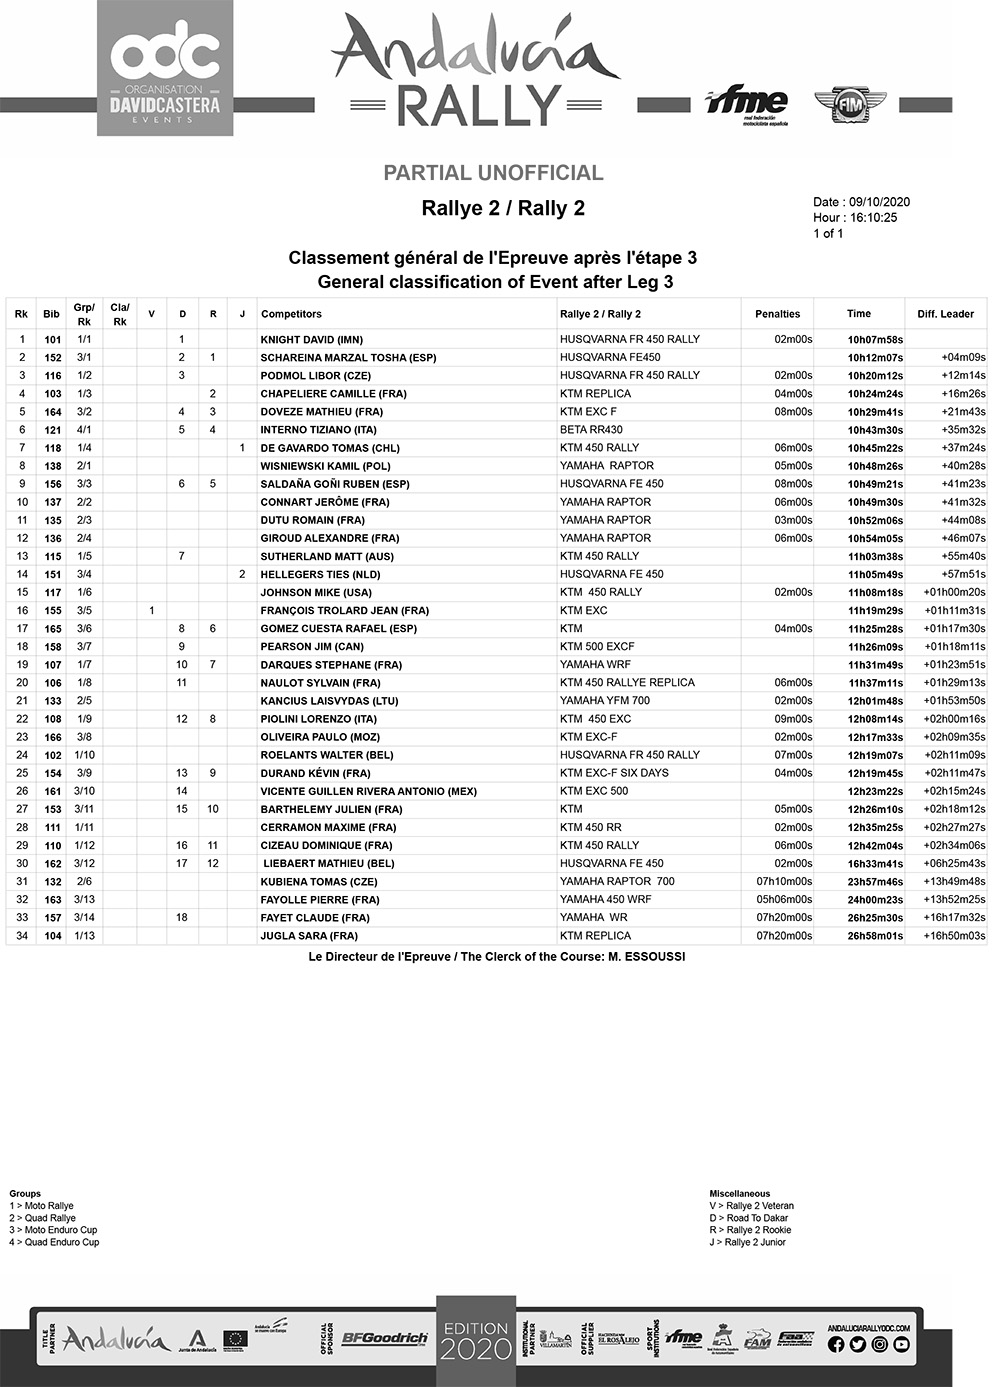 classification-after-leg-3-rally2